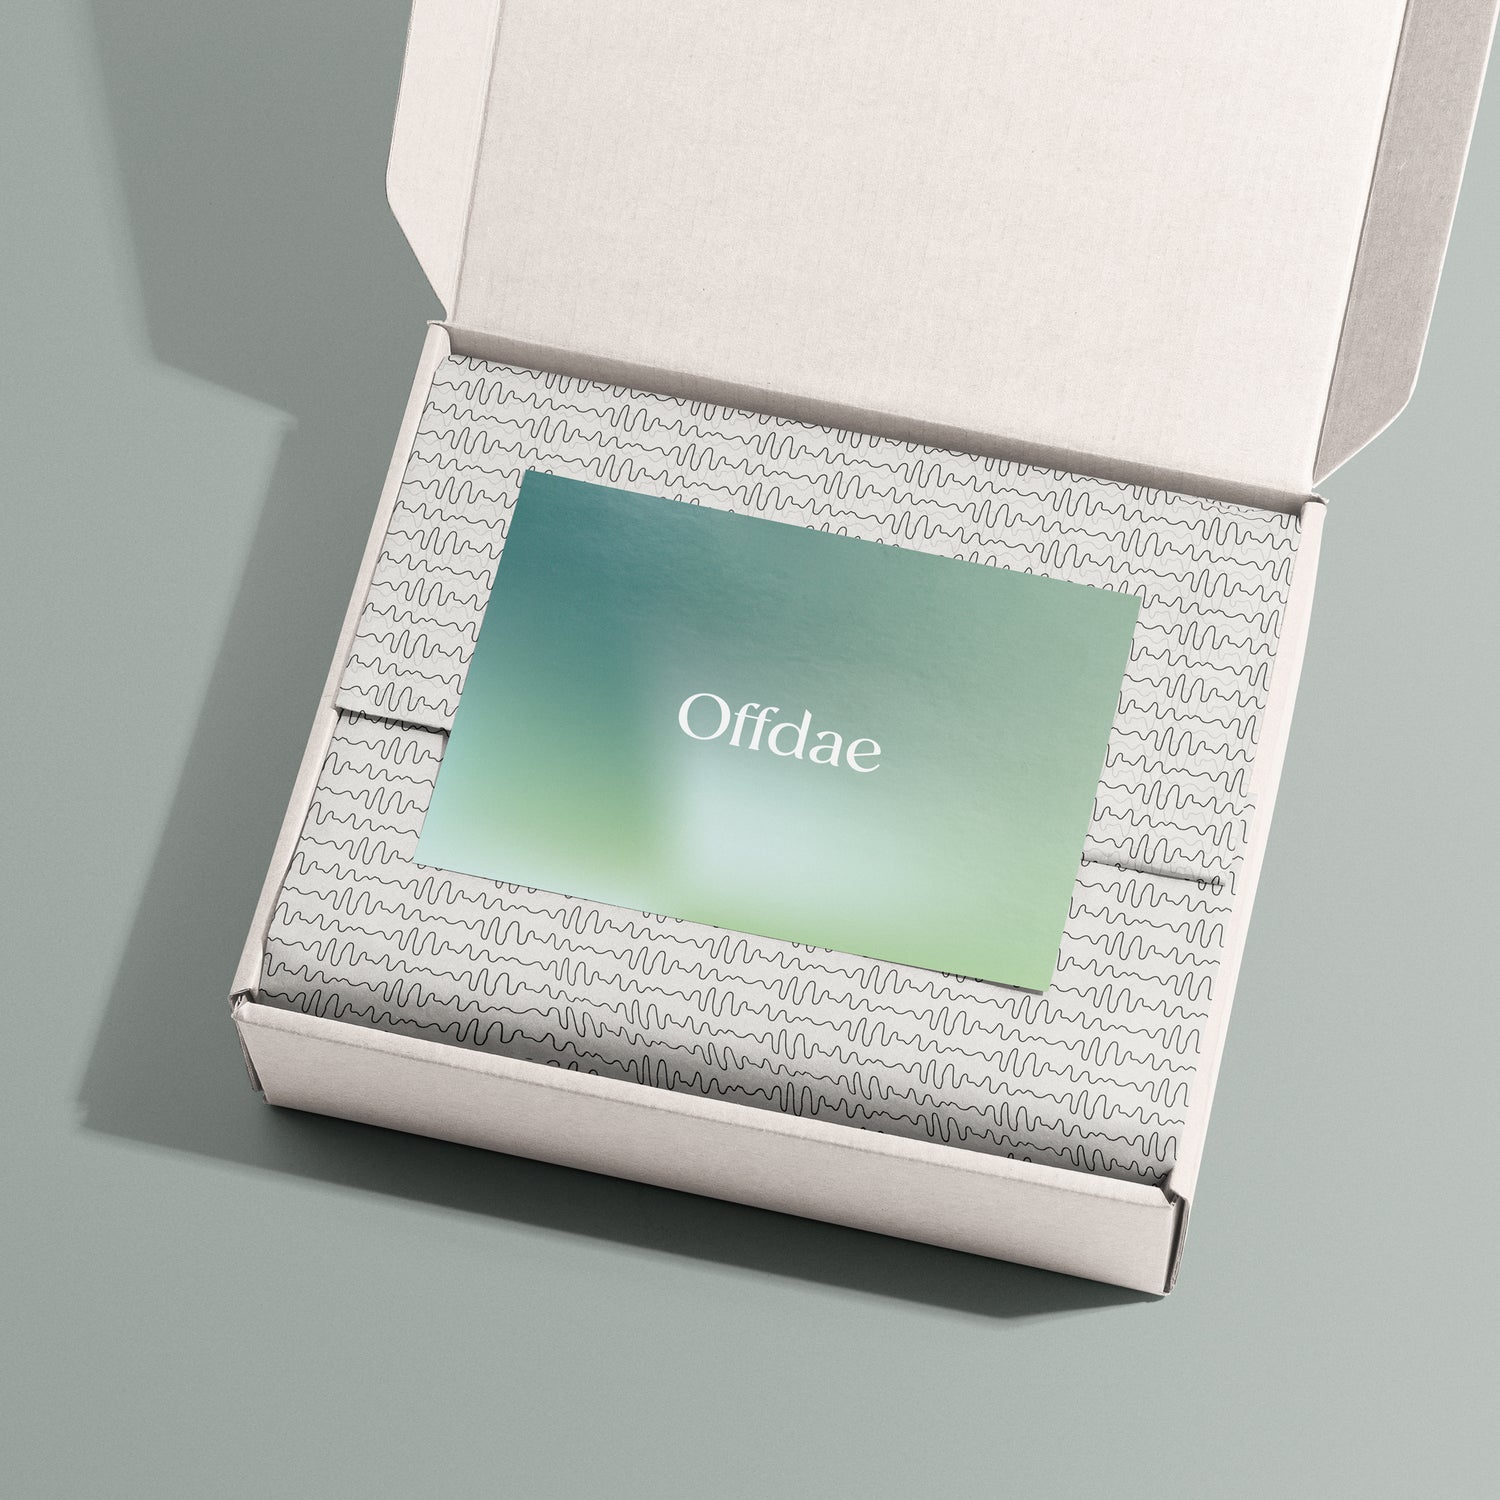 Offdae Alpha Wave Box Packaging with Insert and Tissue Paper